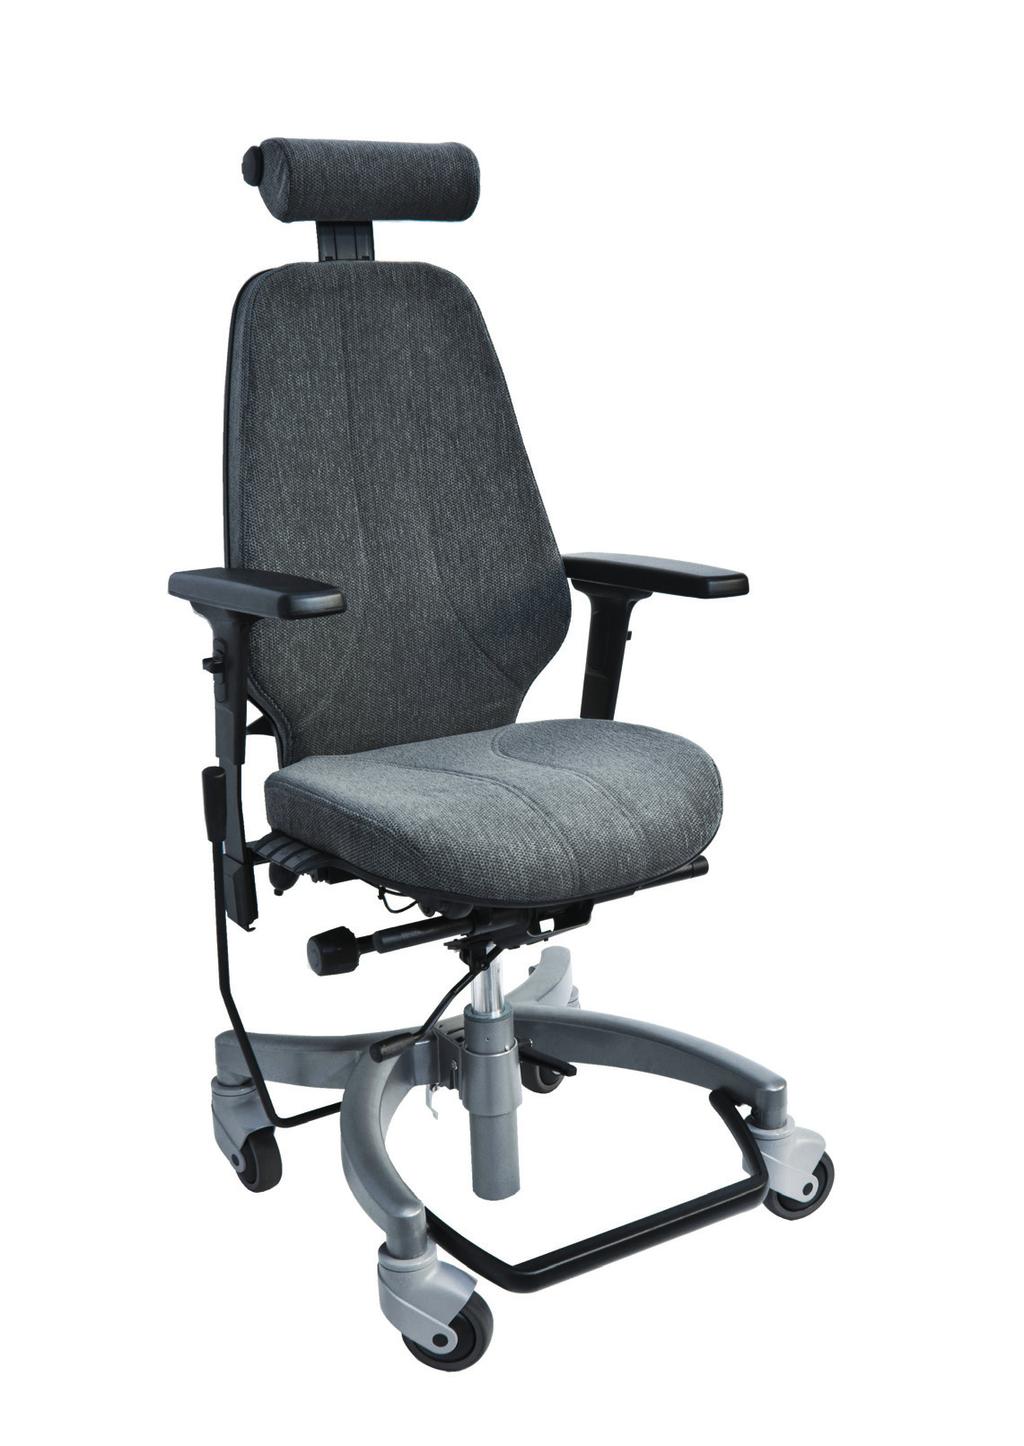 HEPRO G2 TILTO & HEPRO E2 TILTO Work chairs with manual or electric seat lift, manual seat tilt.